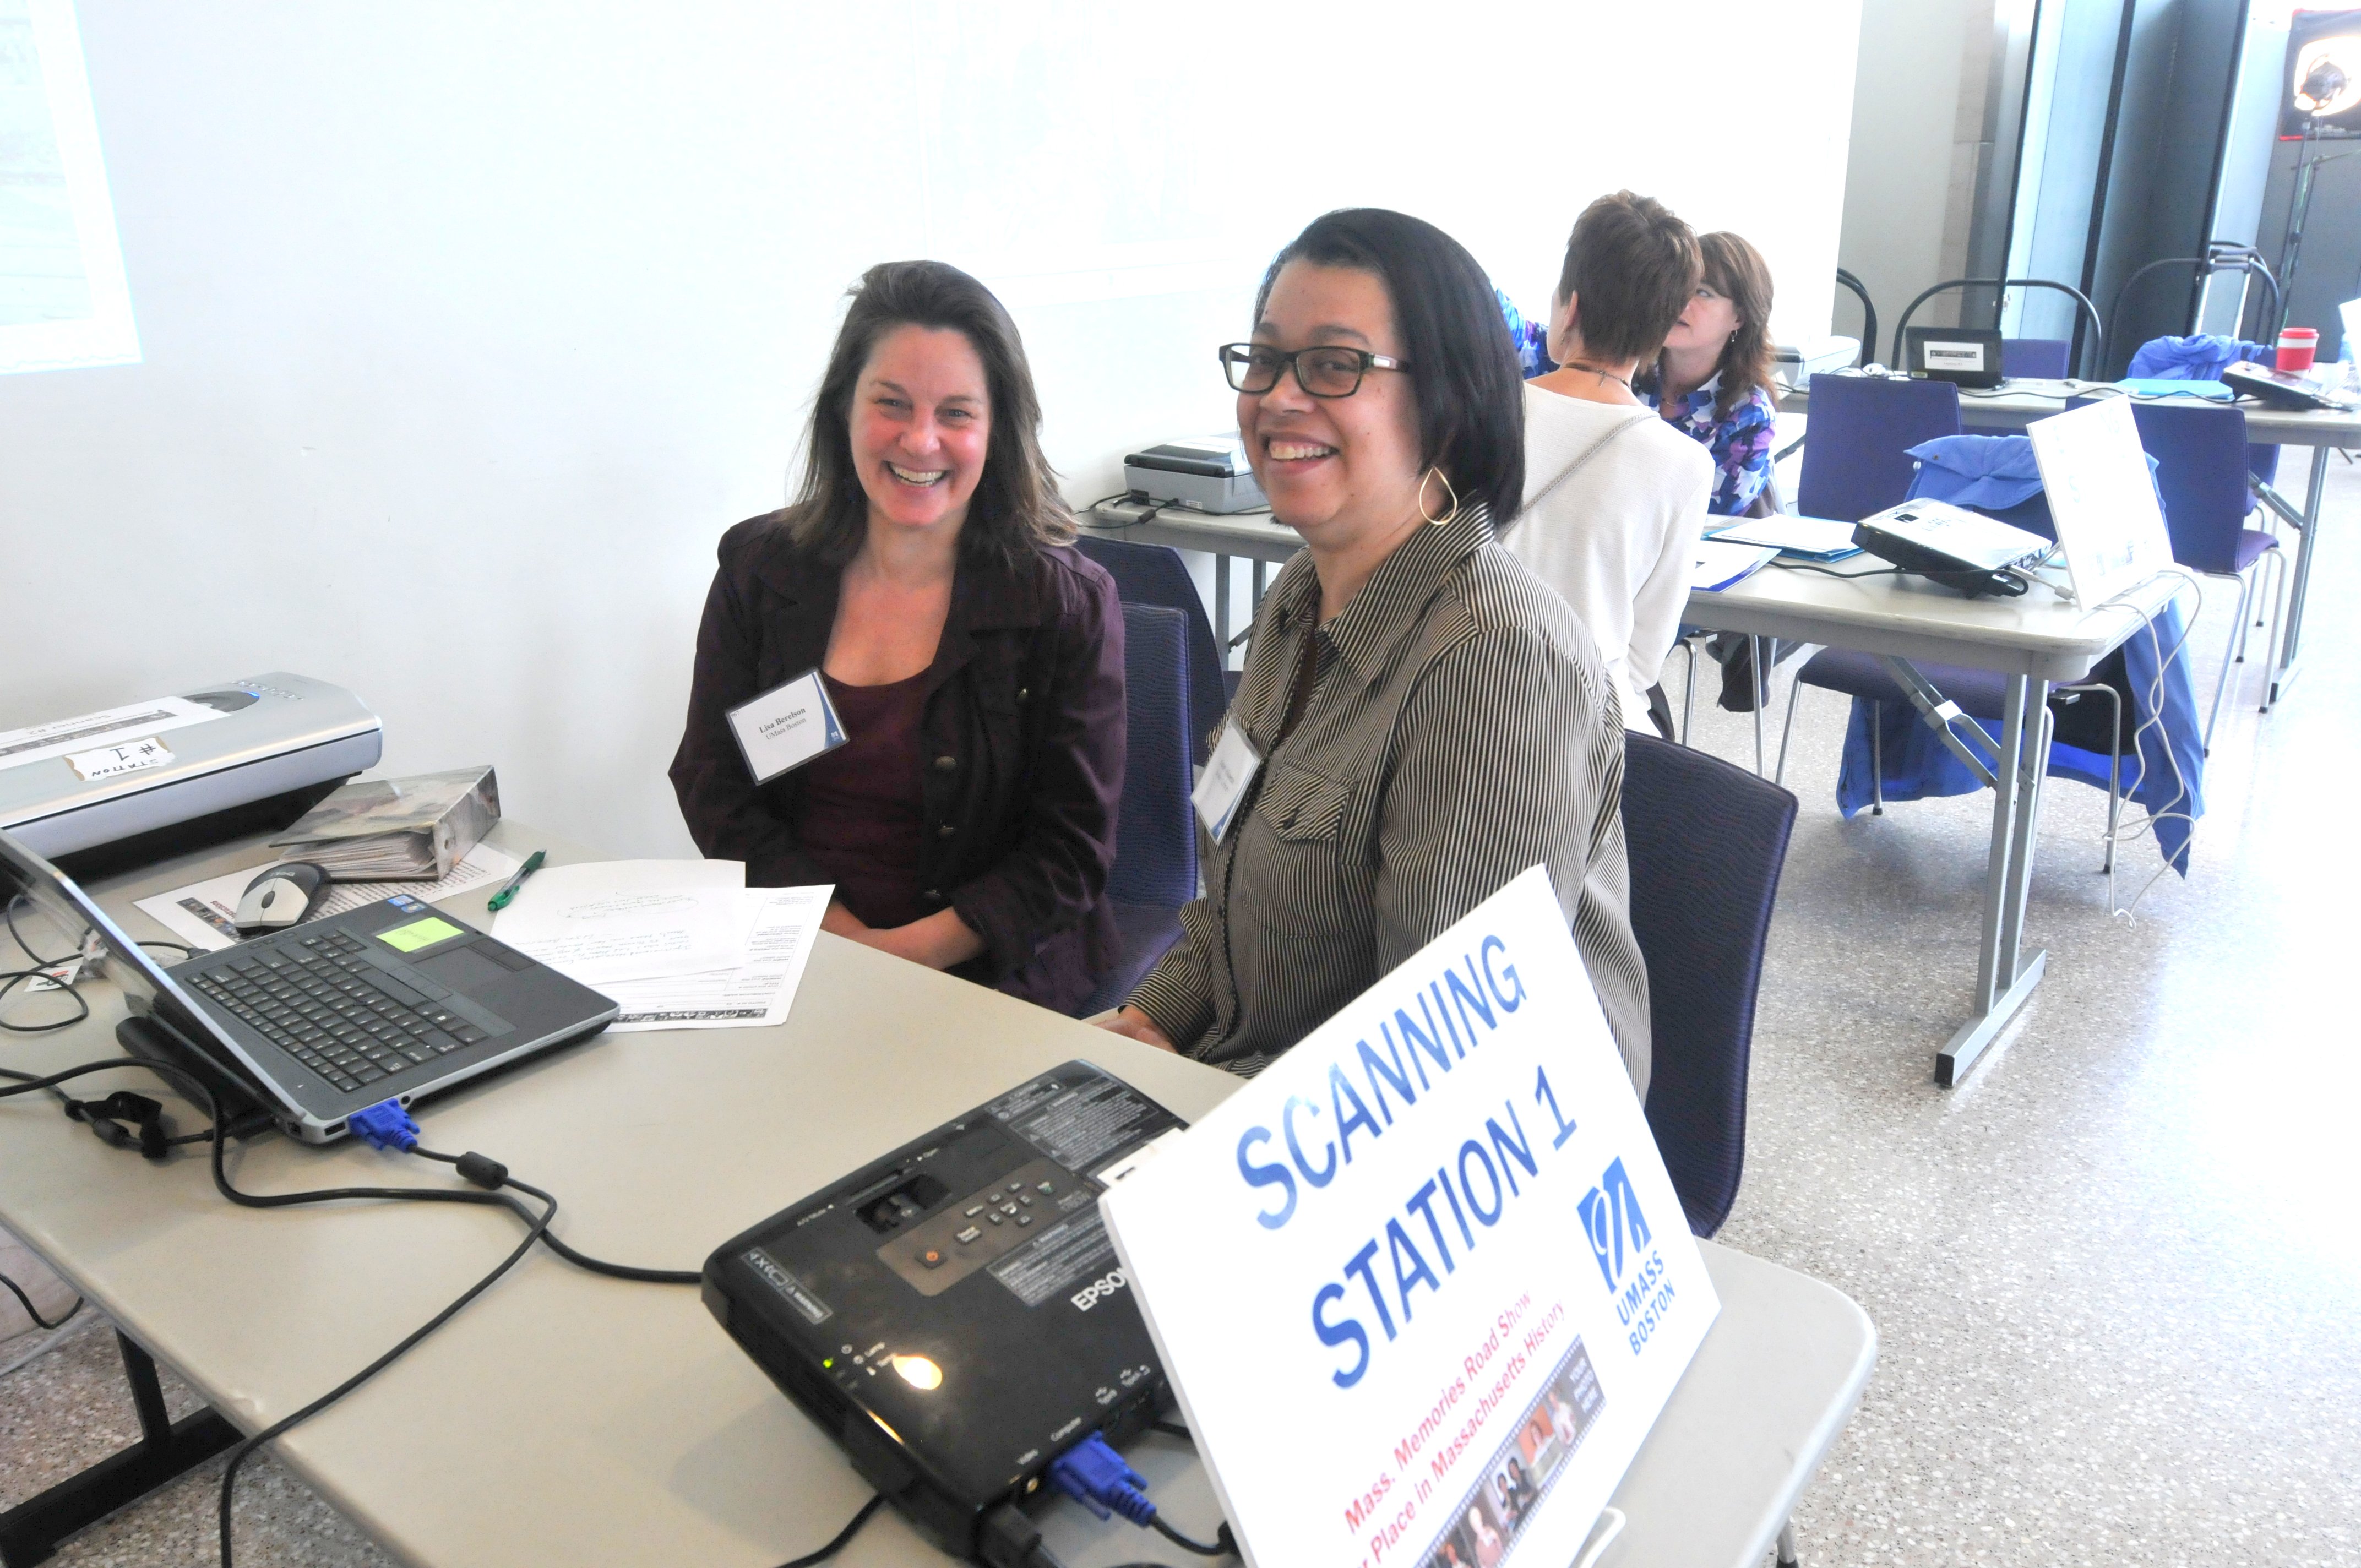 <p>Volunteers at the Scanning Station (also known as the Copying Station) at the UMass Boston Mass. Memories Road Show, 2014</p>